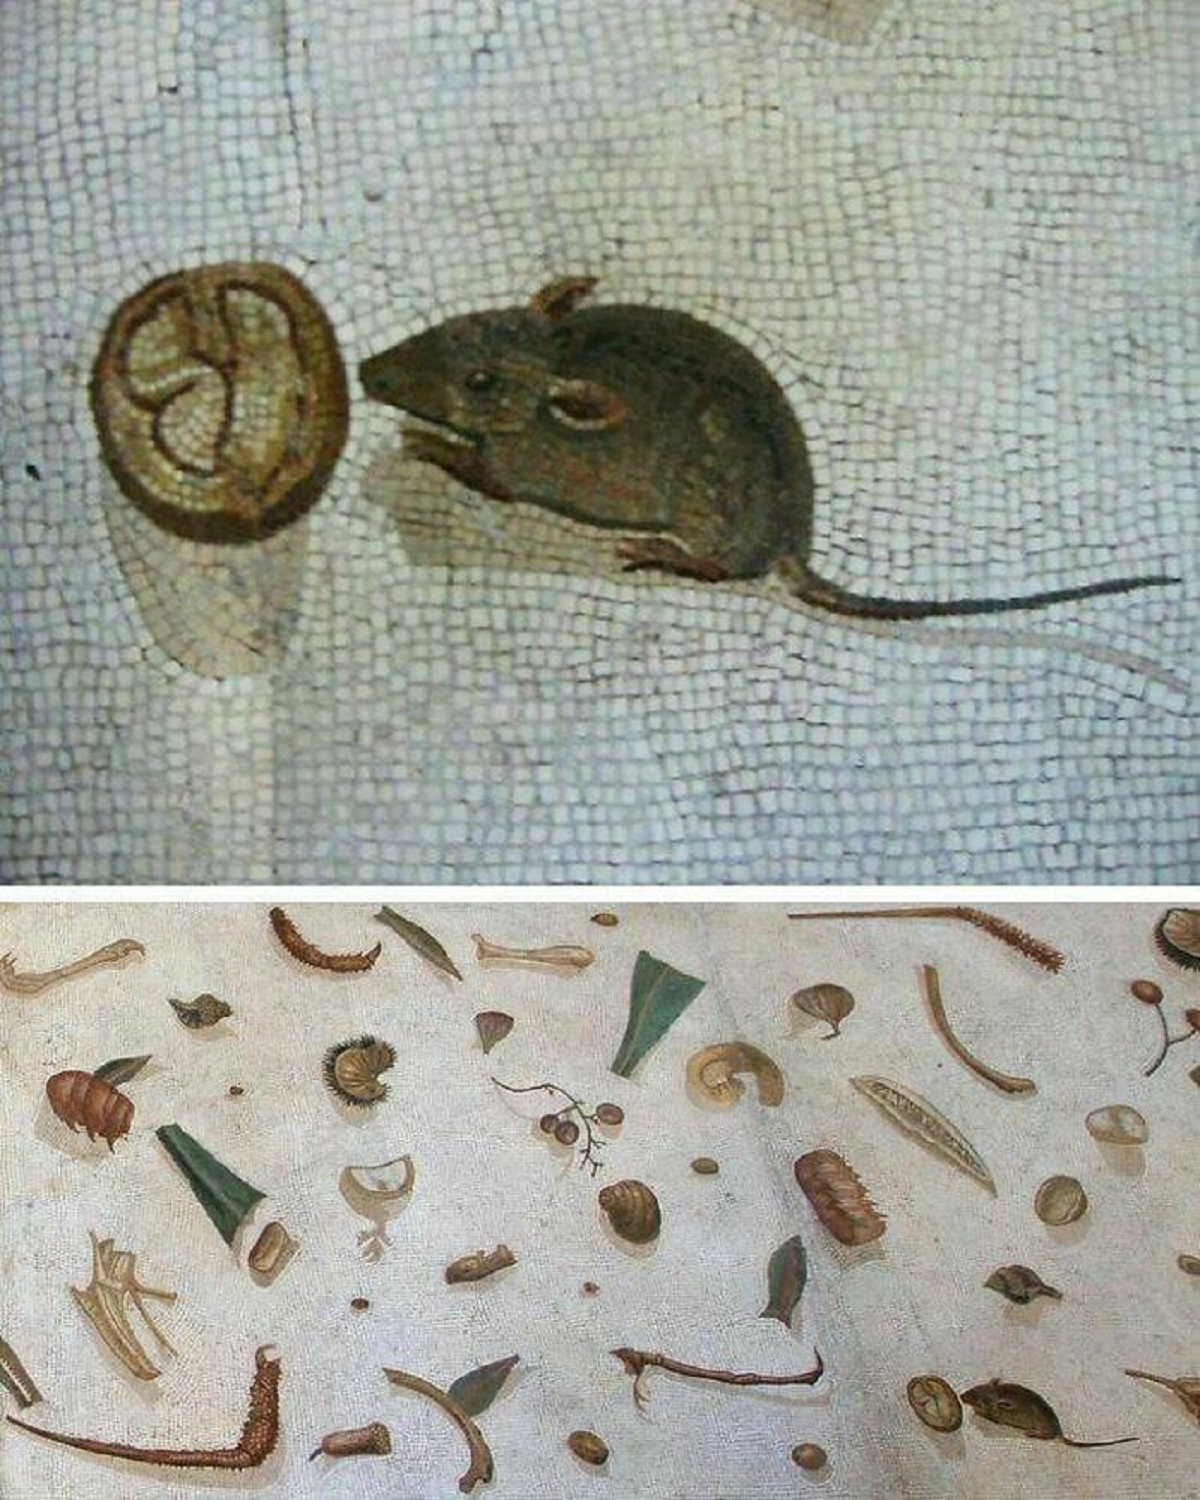 "Detail From The “Unswept Floor” Mosaic Made By Heraclitus, Showing A Mouse Eating A Walnut. 2nd Century Ce, Now On Display At The Vatican Museums"